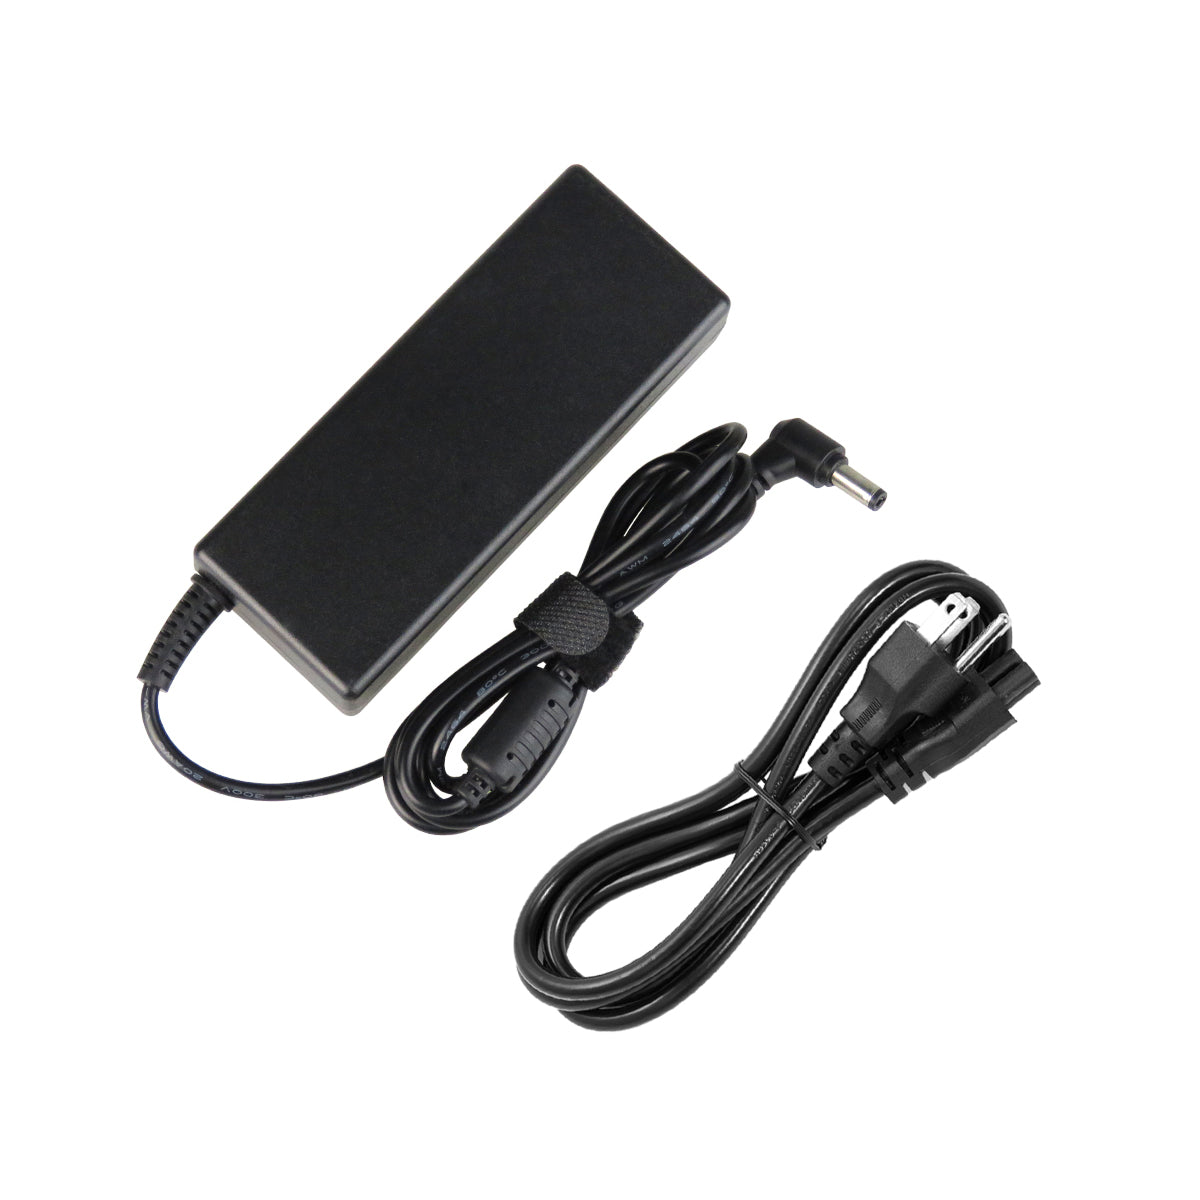 AC Adapter Charger for ASUS K45A Notebook.